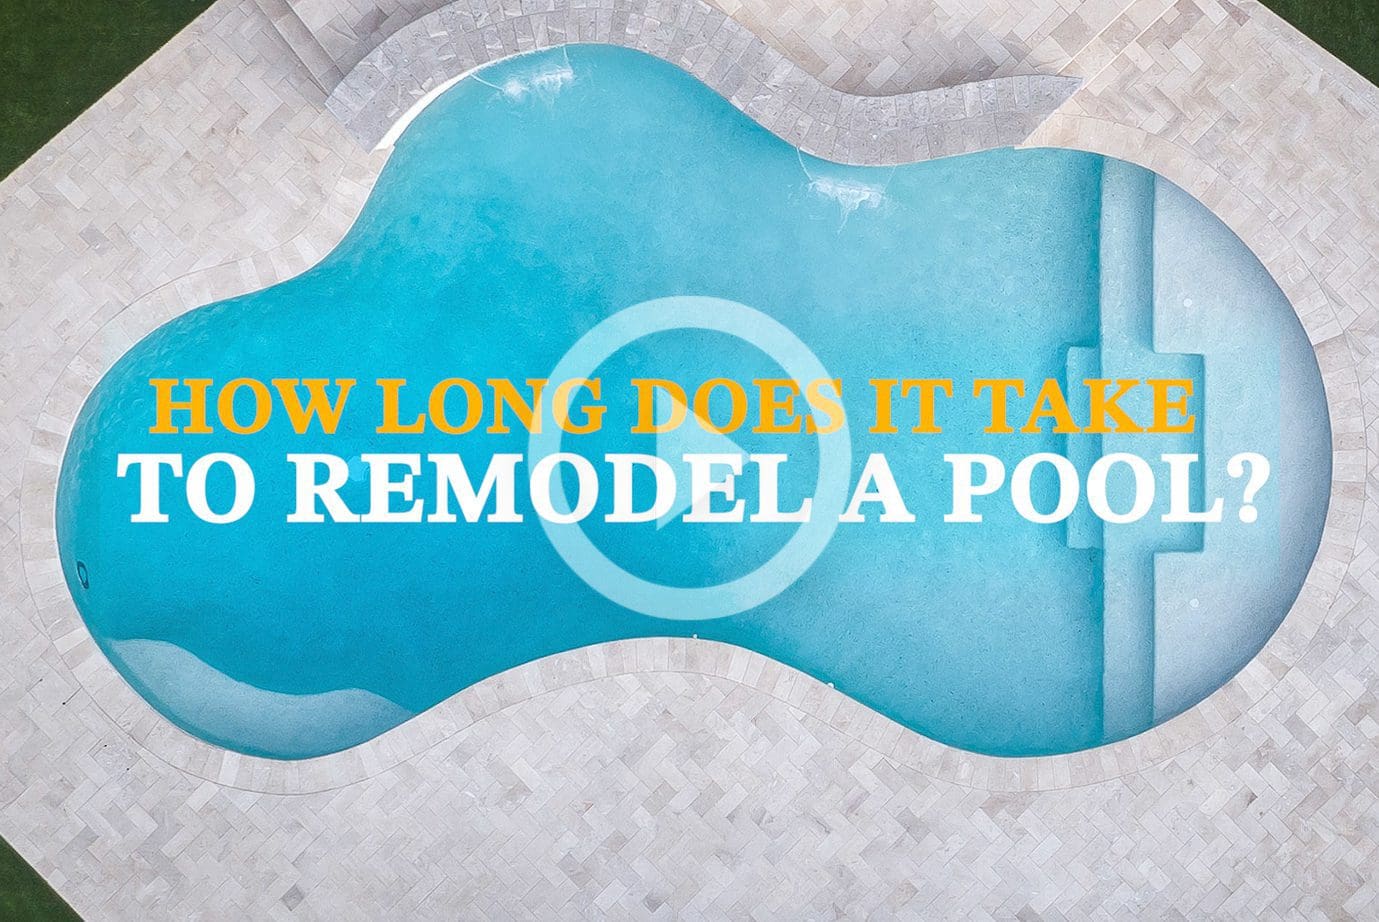 How Long Does A Pool Remodel Take?